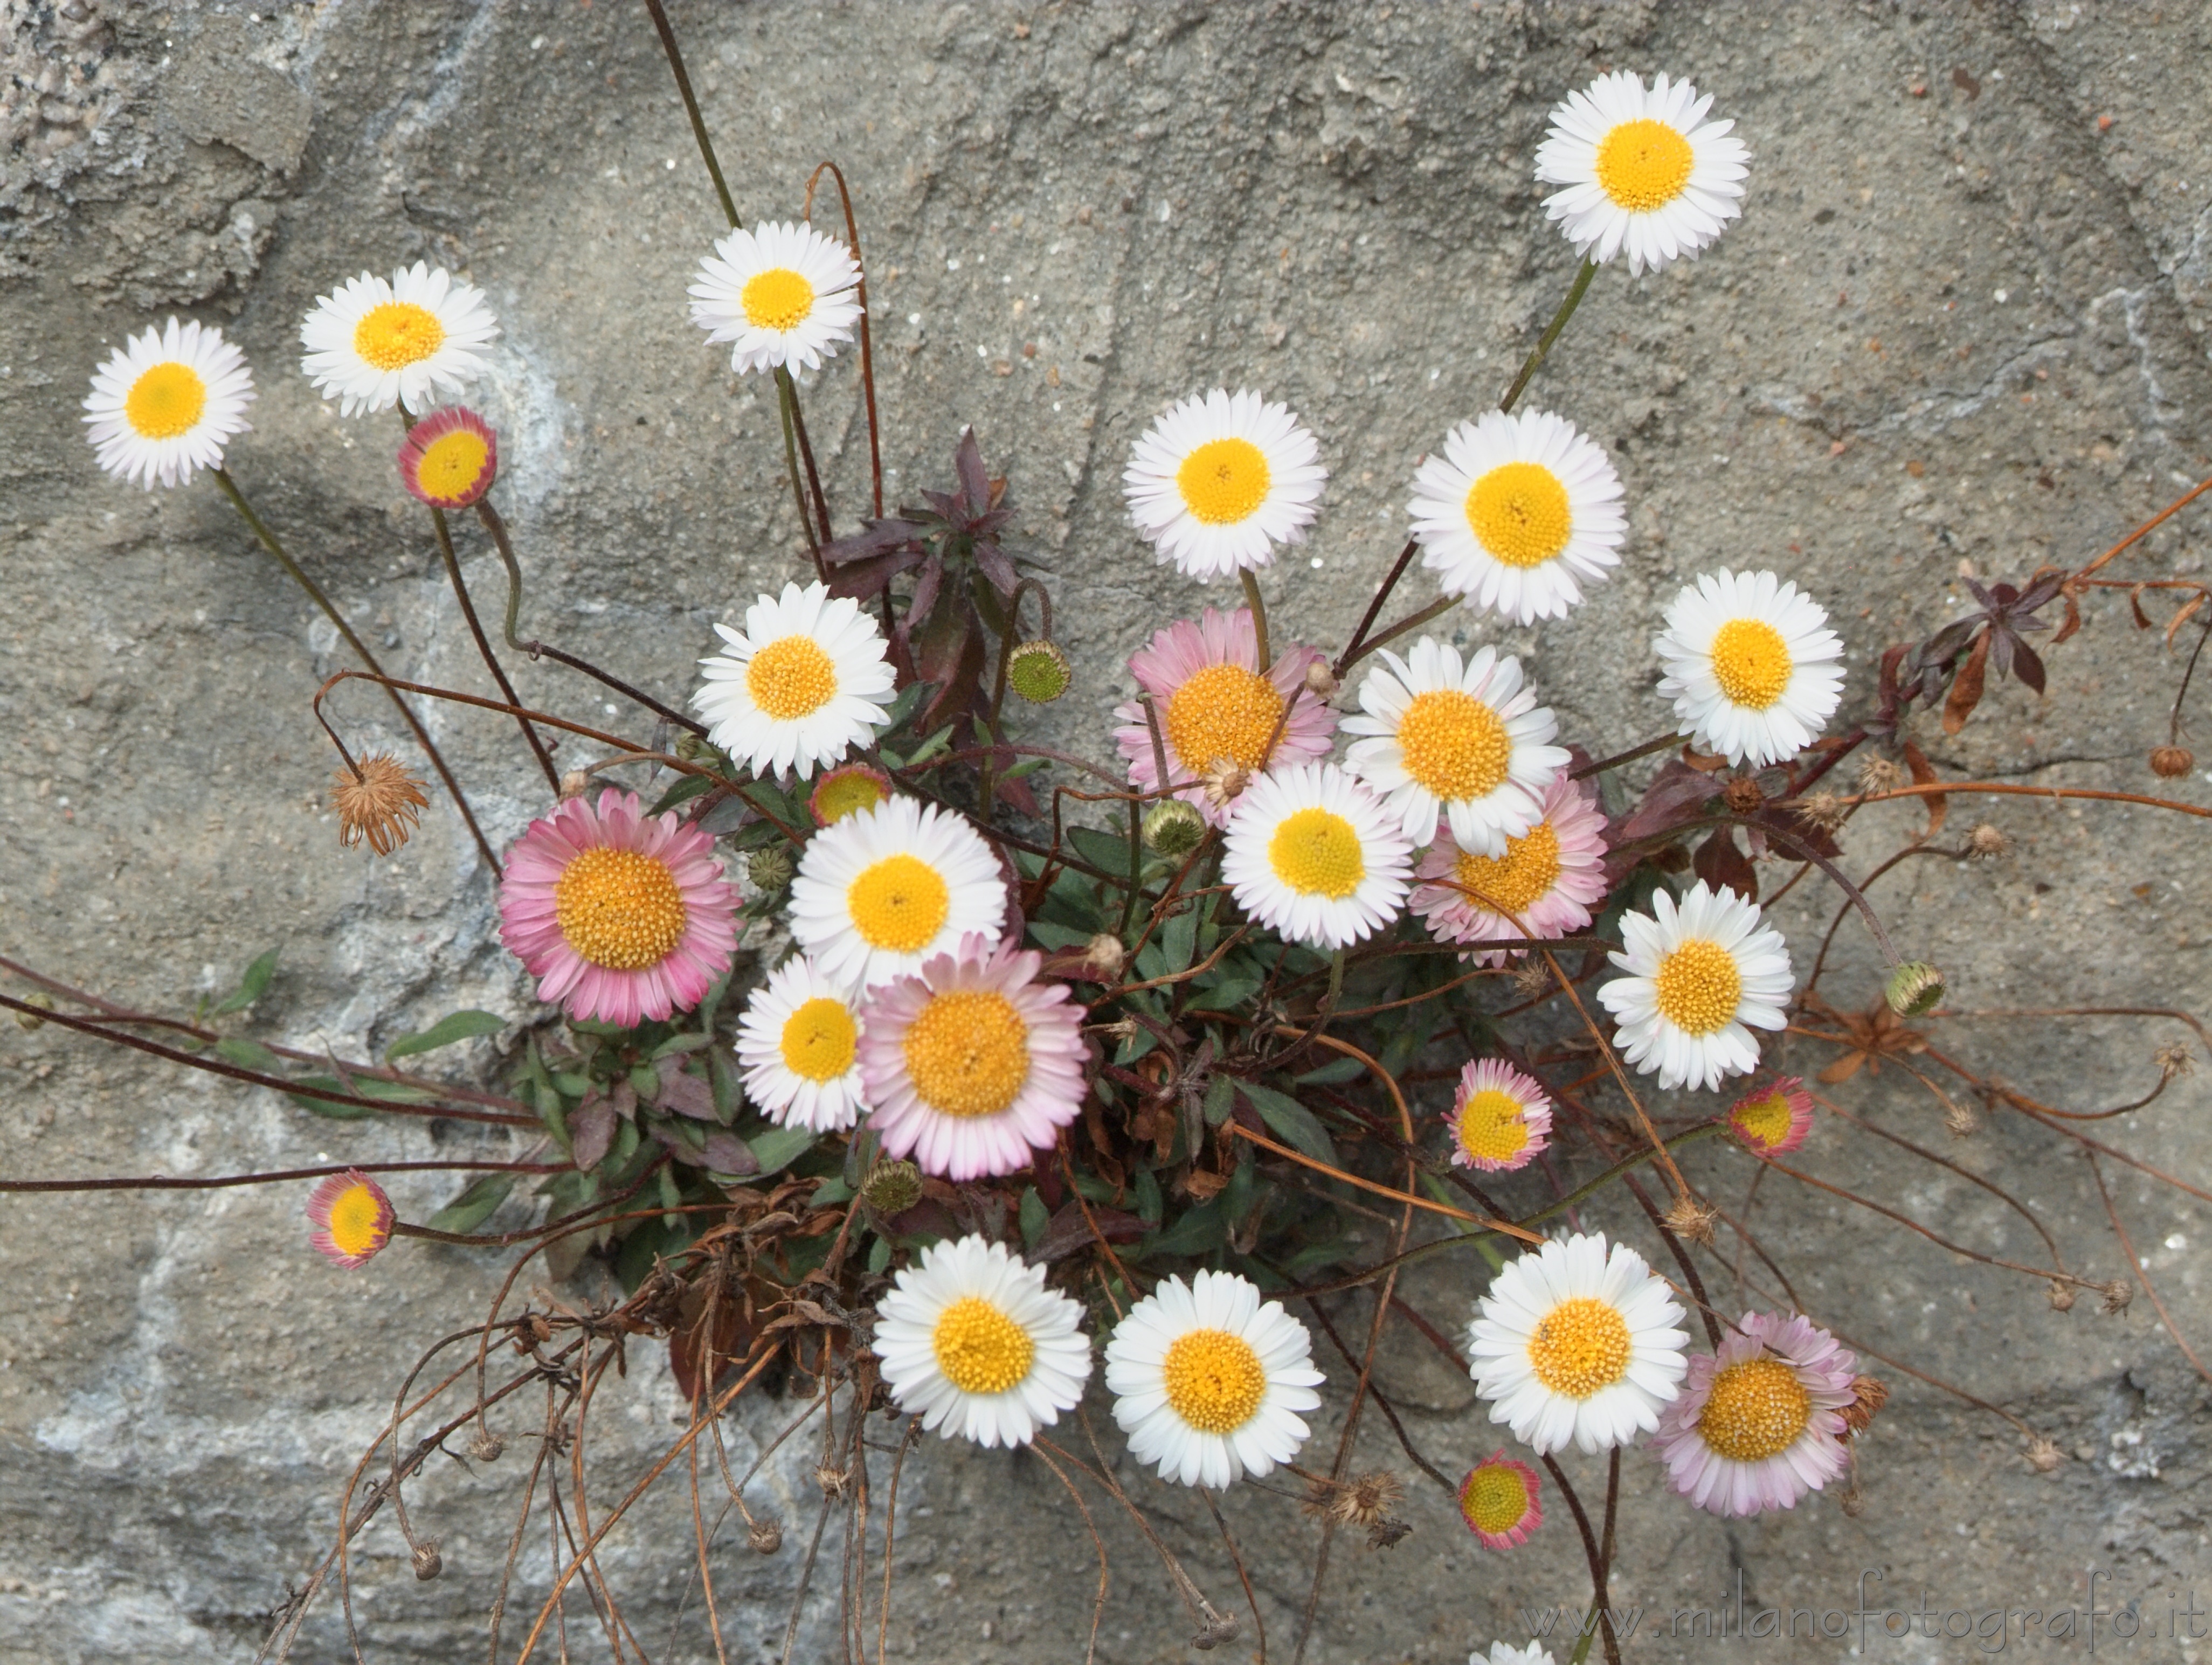 Valmosca fraction of Campiglia Cervo (Biella, Italy): Group of small daisies on a cement wall - Valmosca fraction of Campiglia Cervo (Biella, Italy)